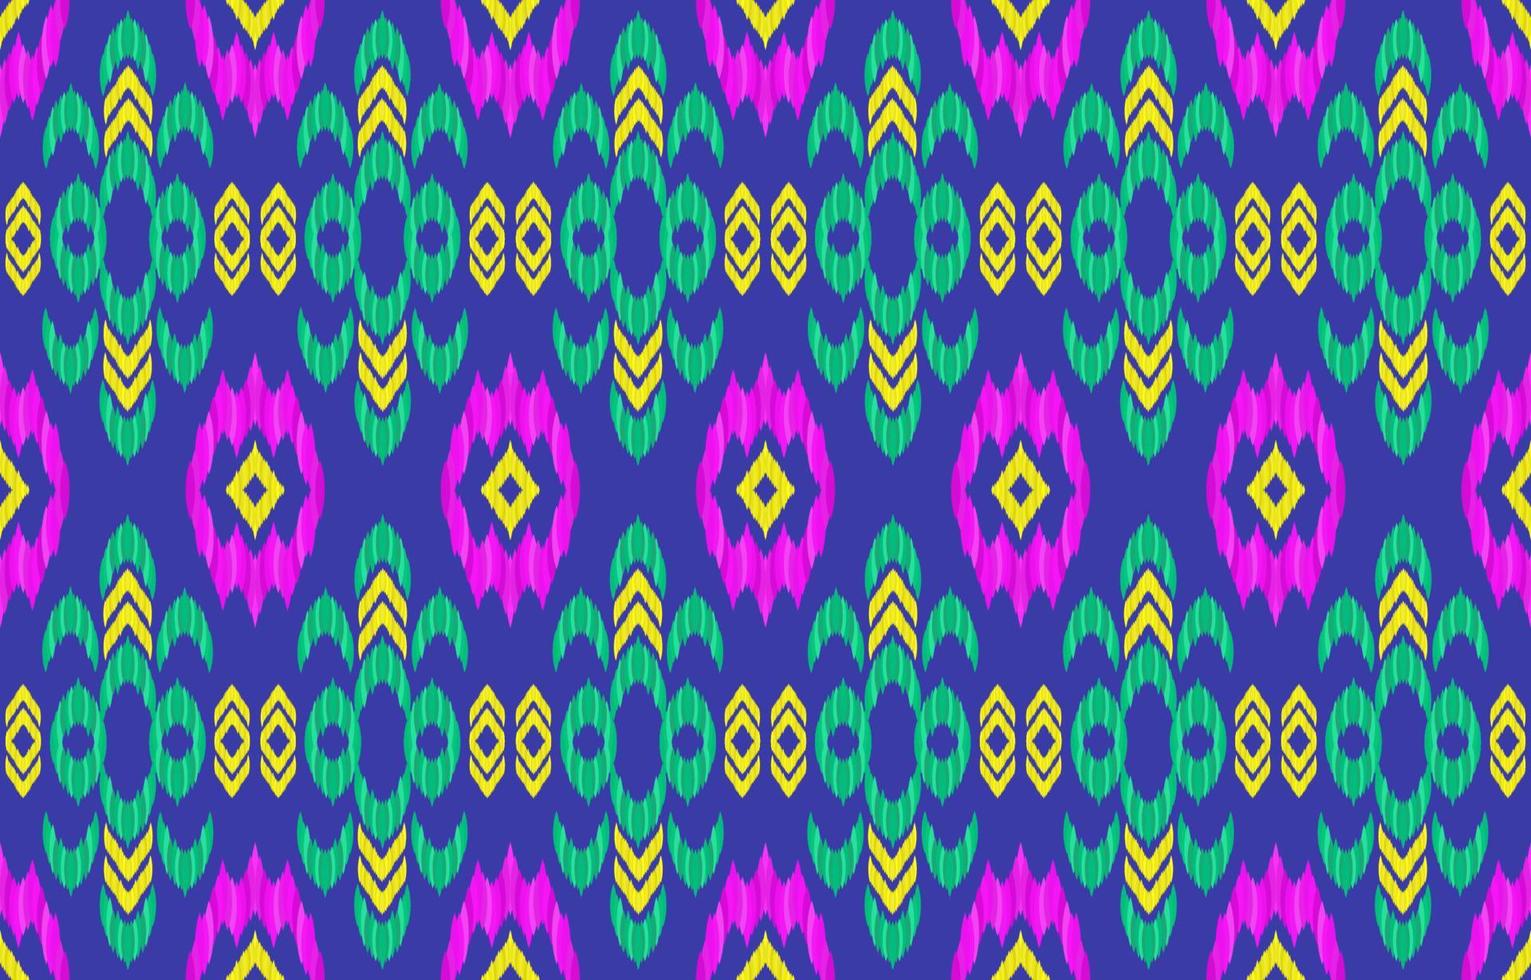 Ikat ethnic fabric pattern. Geometric tribal vintage retro indian navajo aztec style. Design for decorate backdrop, endless texture, fabric, clothing, textile, embroidery, carpet. Vector illustration.